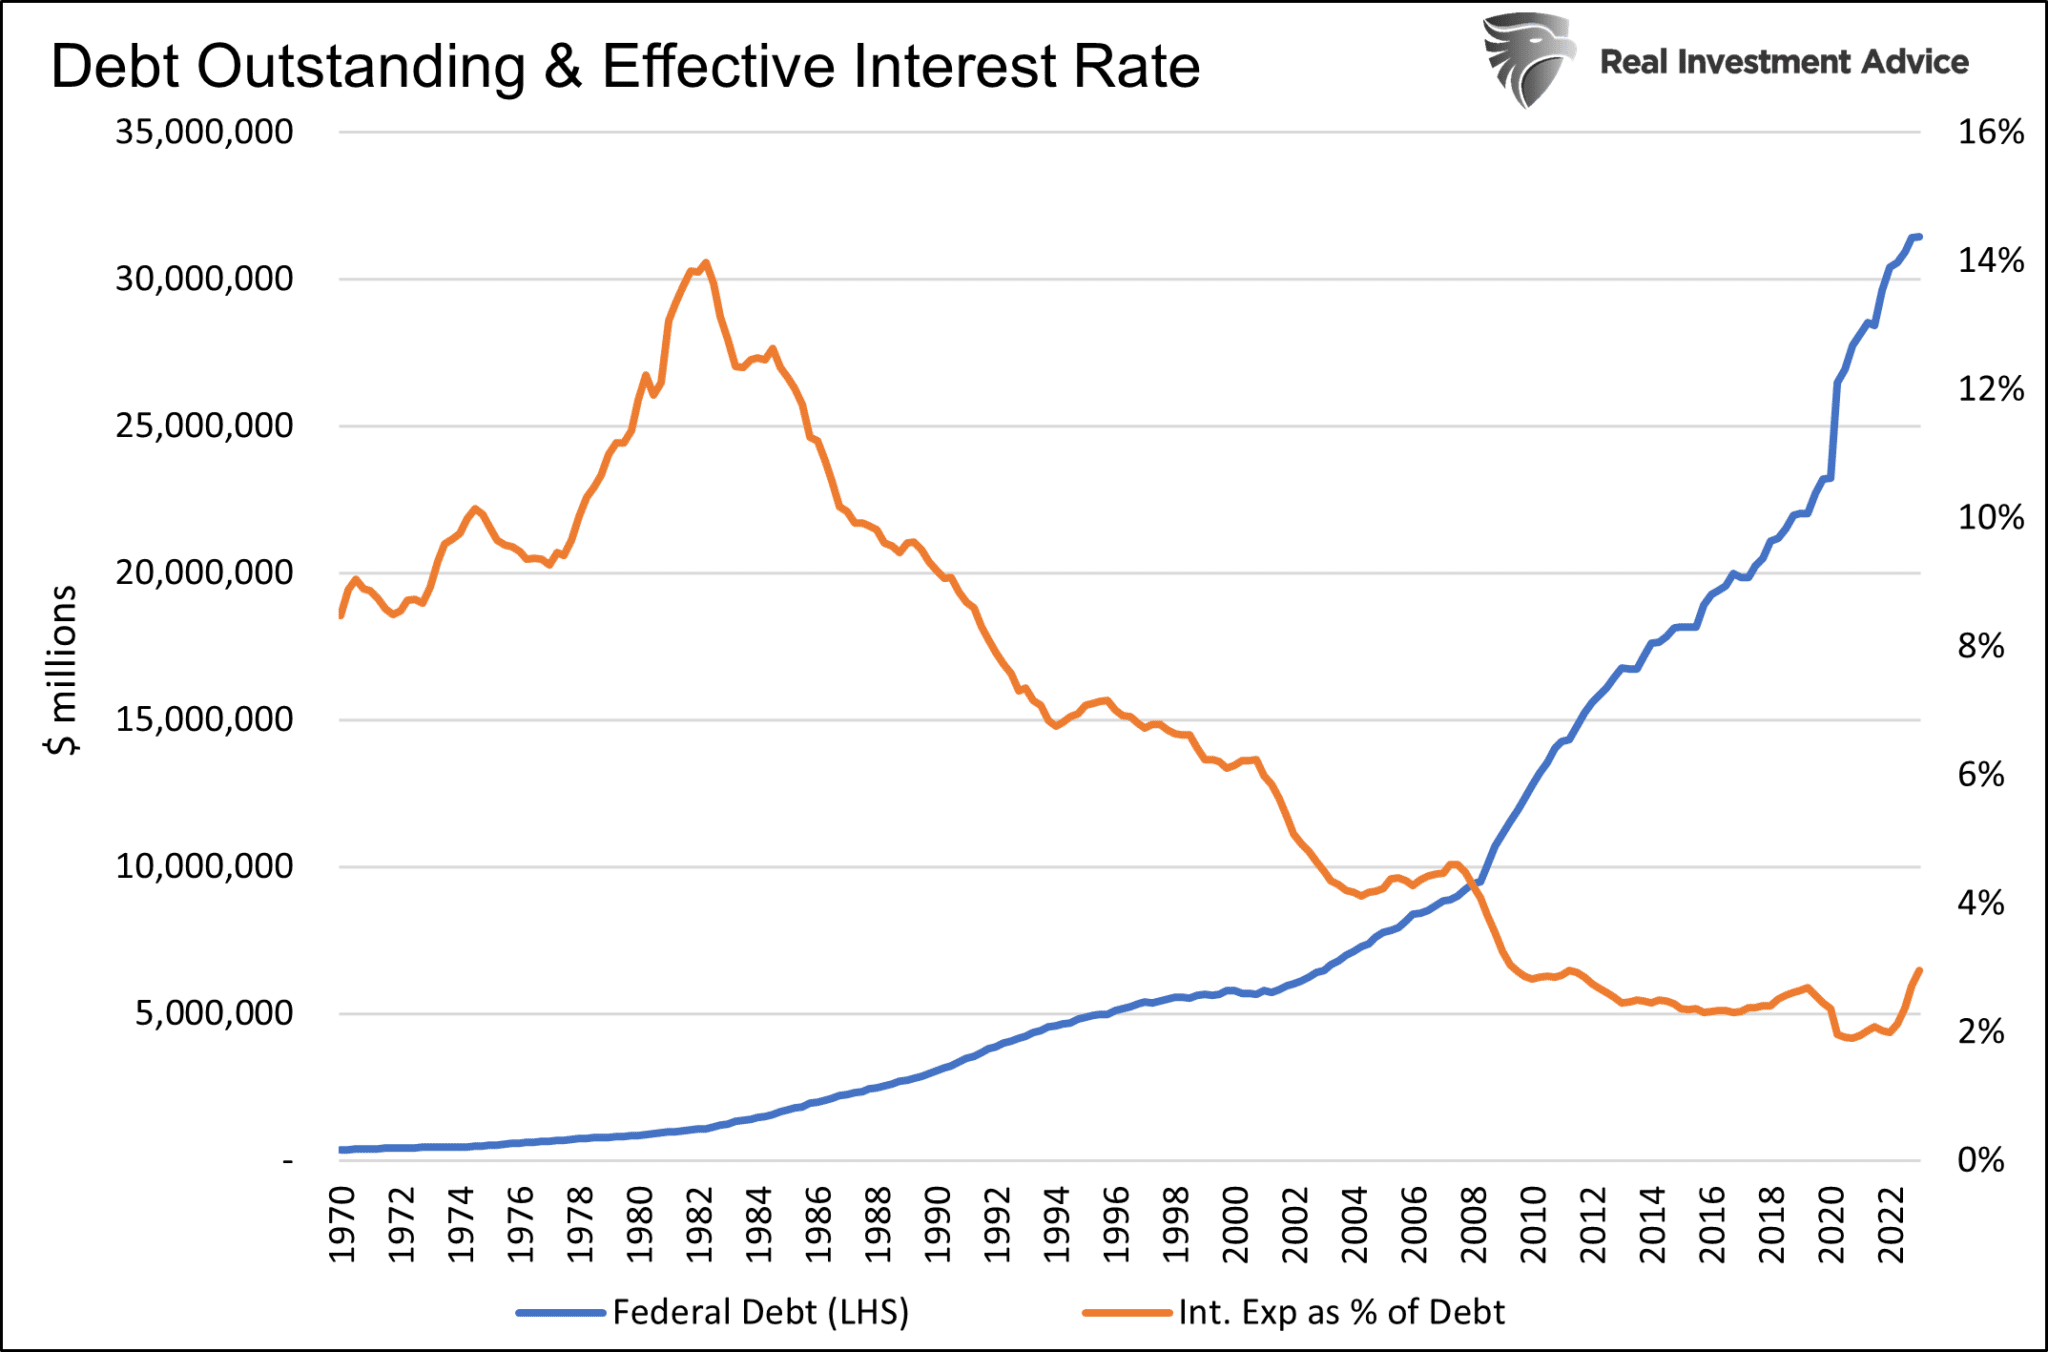 Debt Oustanding and Effective Interest Rate